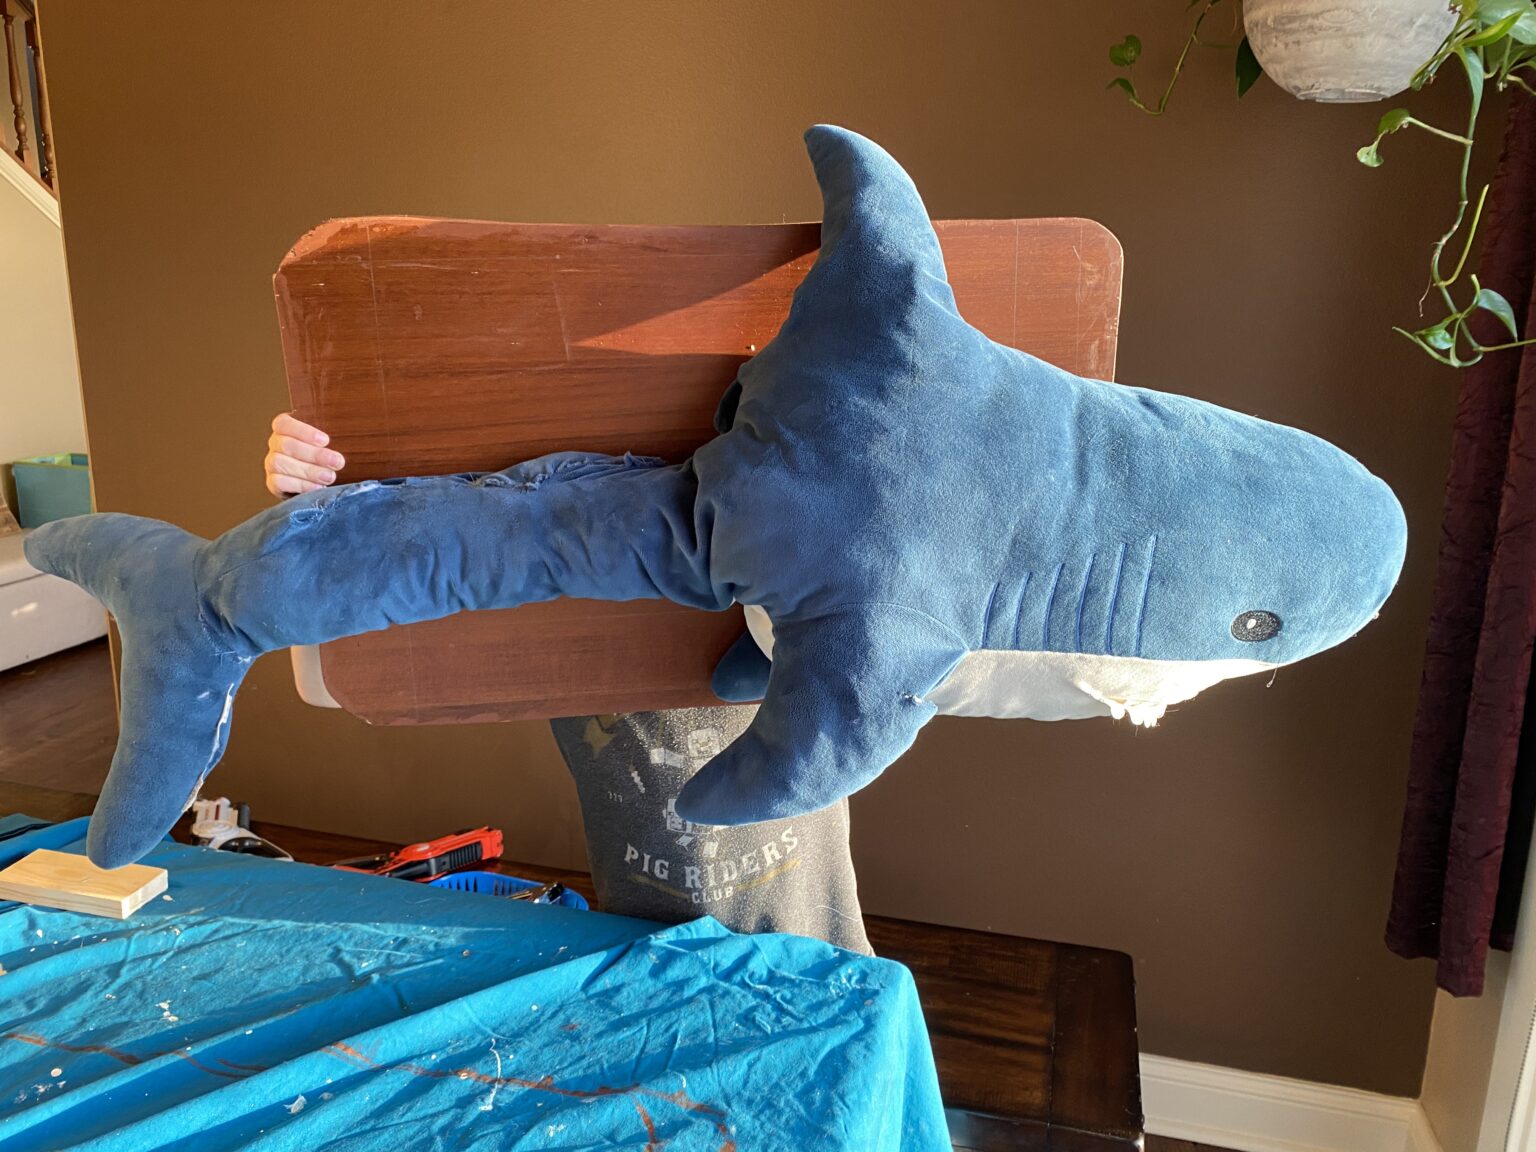 Whodonit? (Plush) Shark Attack and Restoration